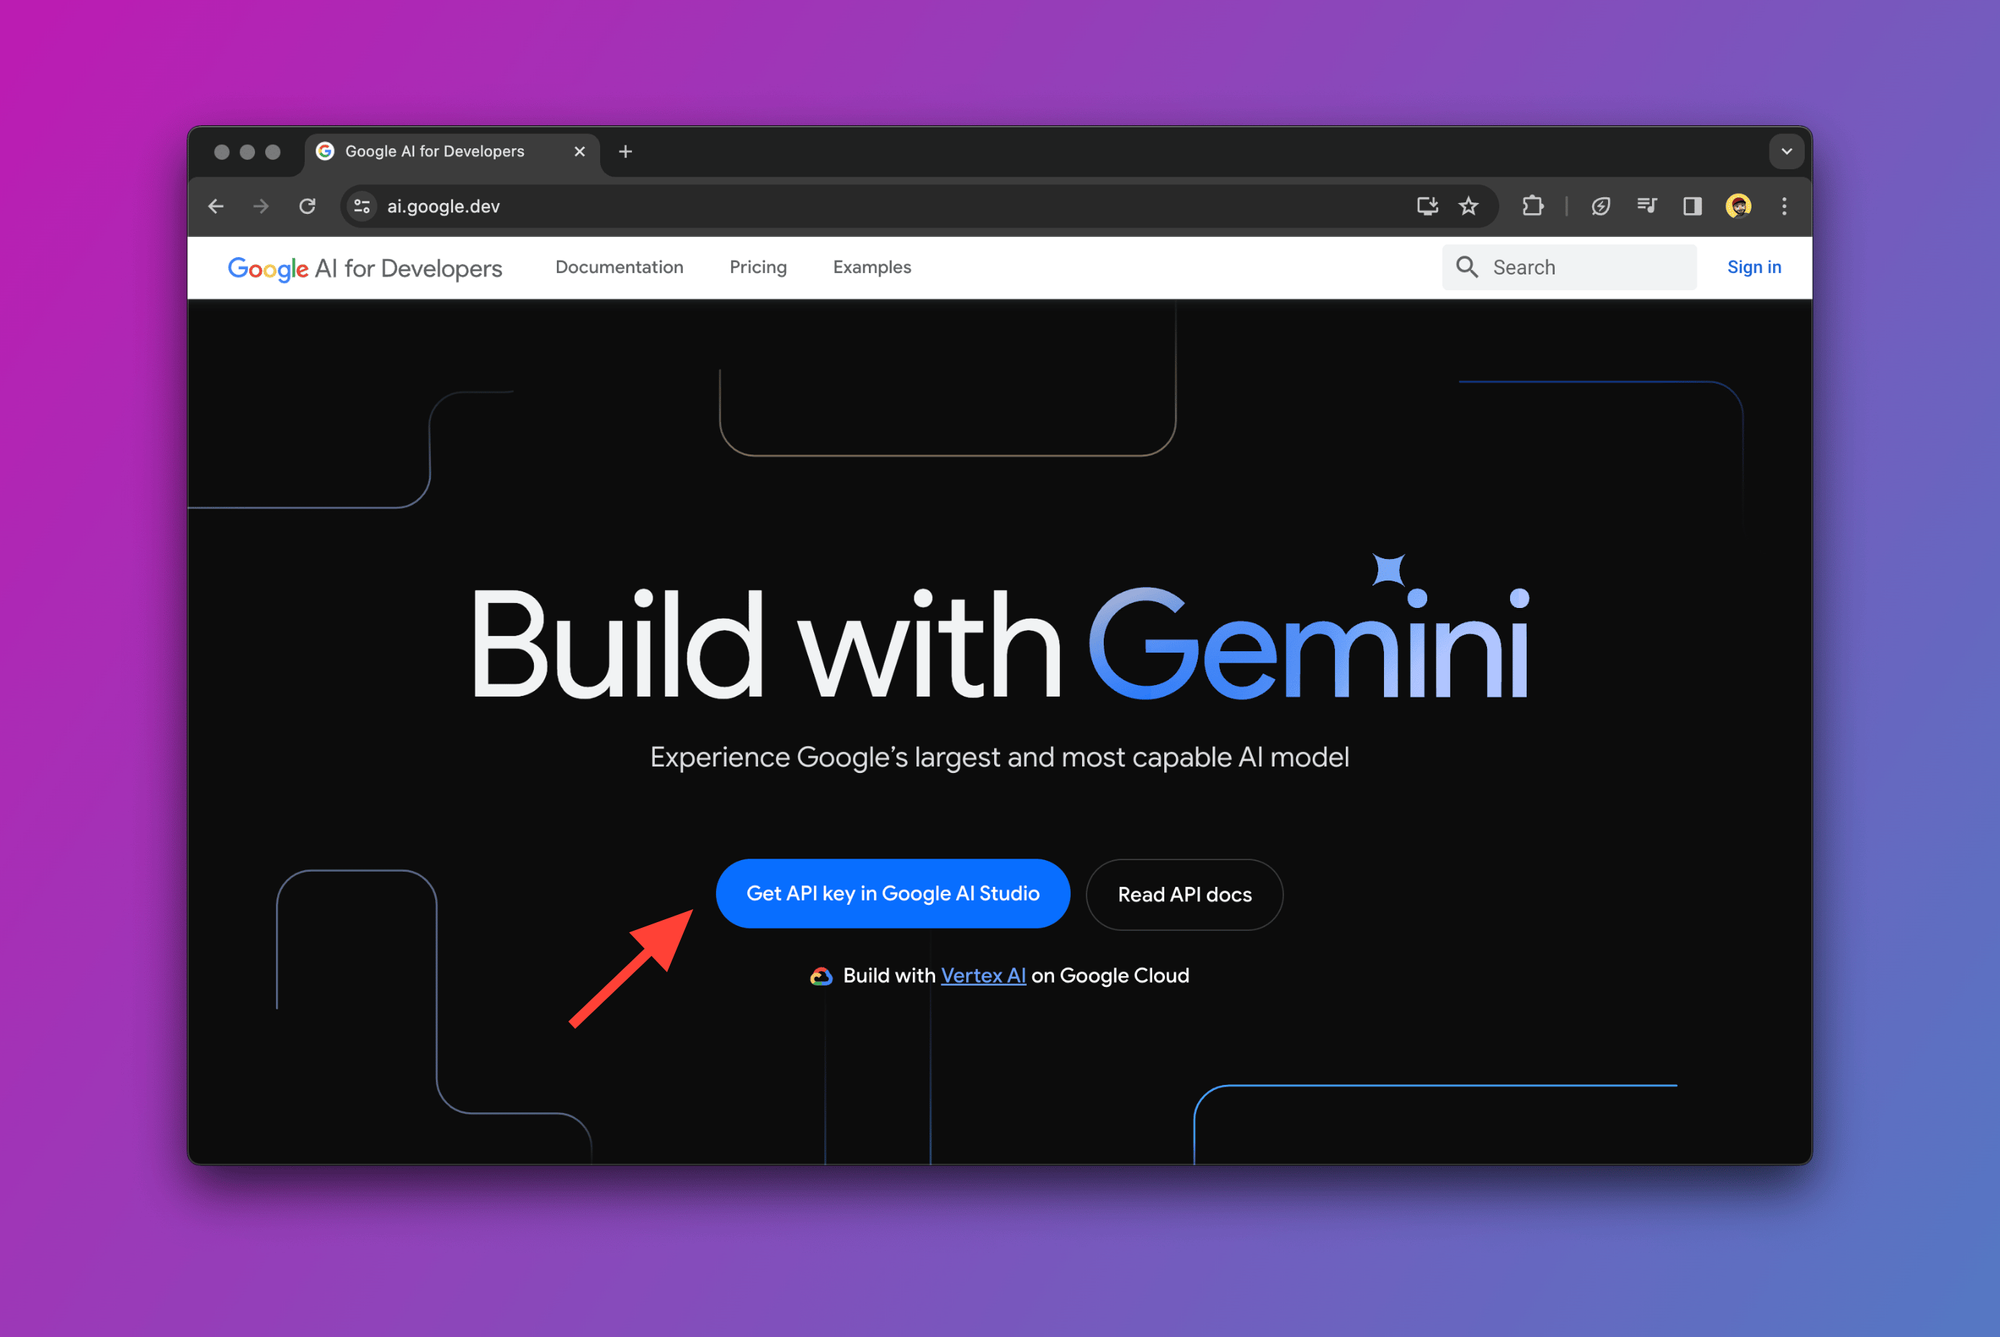 Google AI for Developers landing page